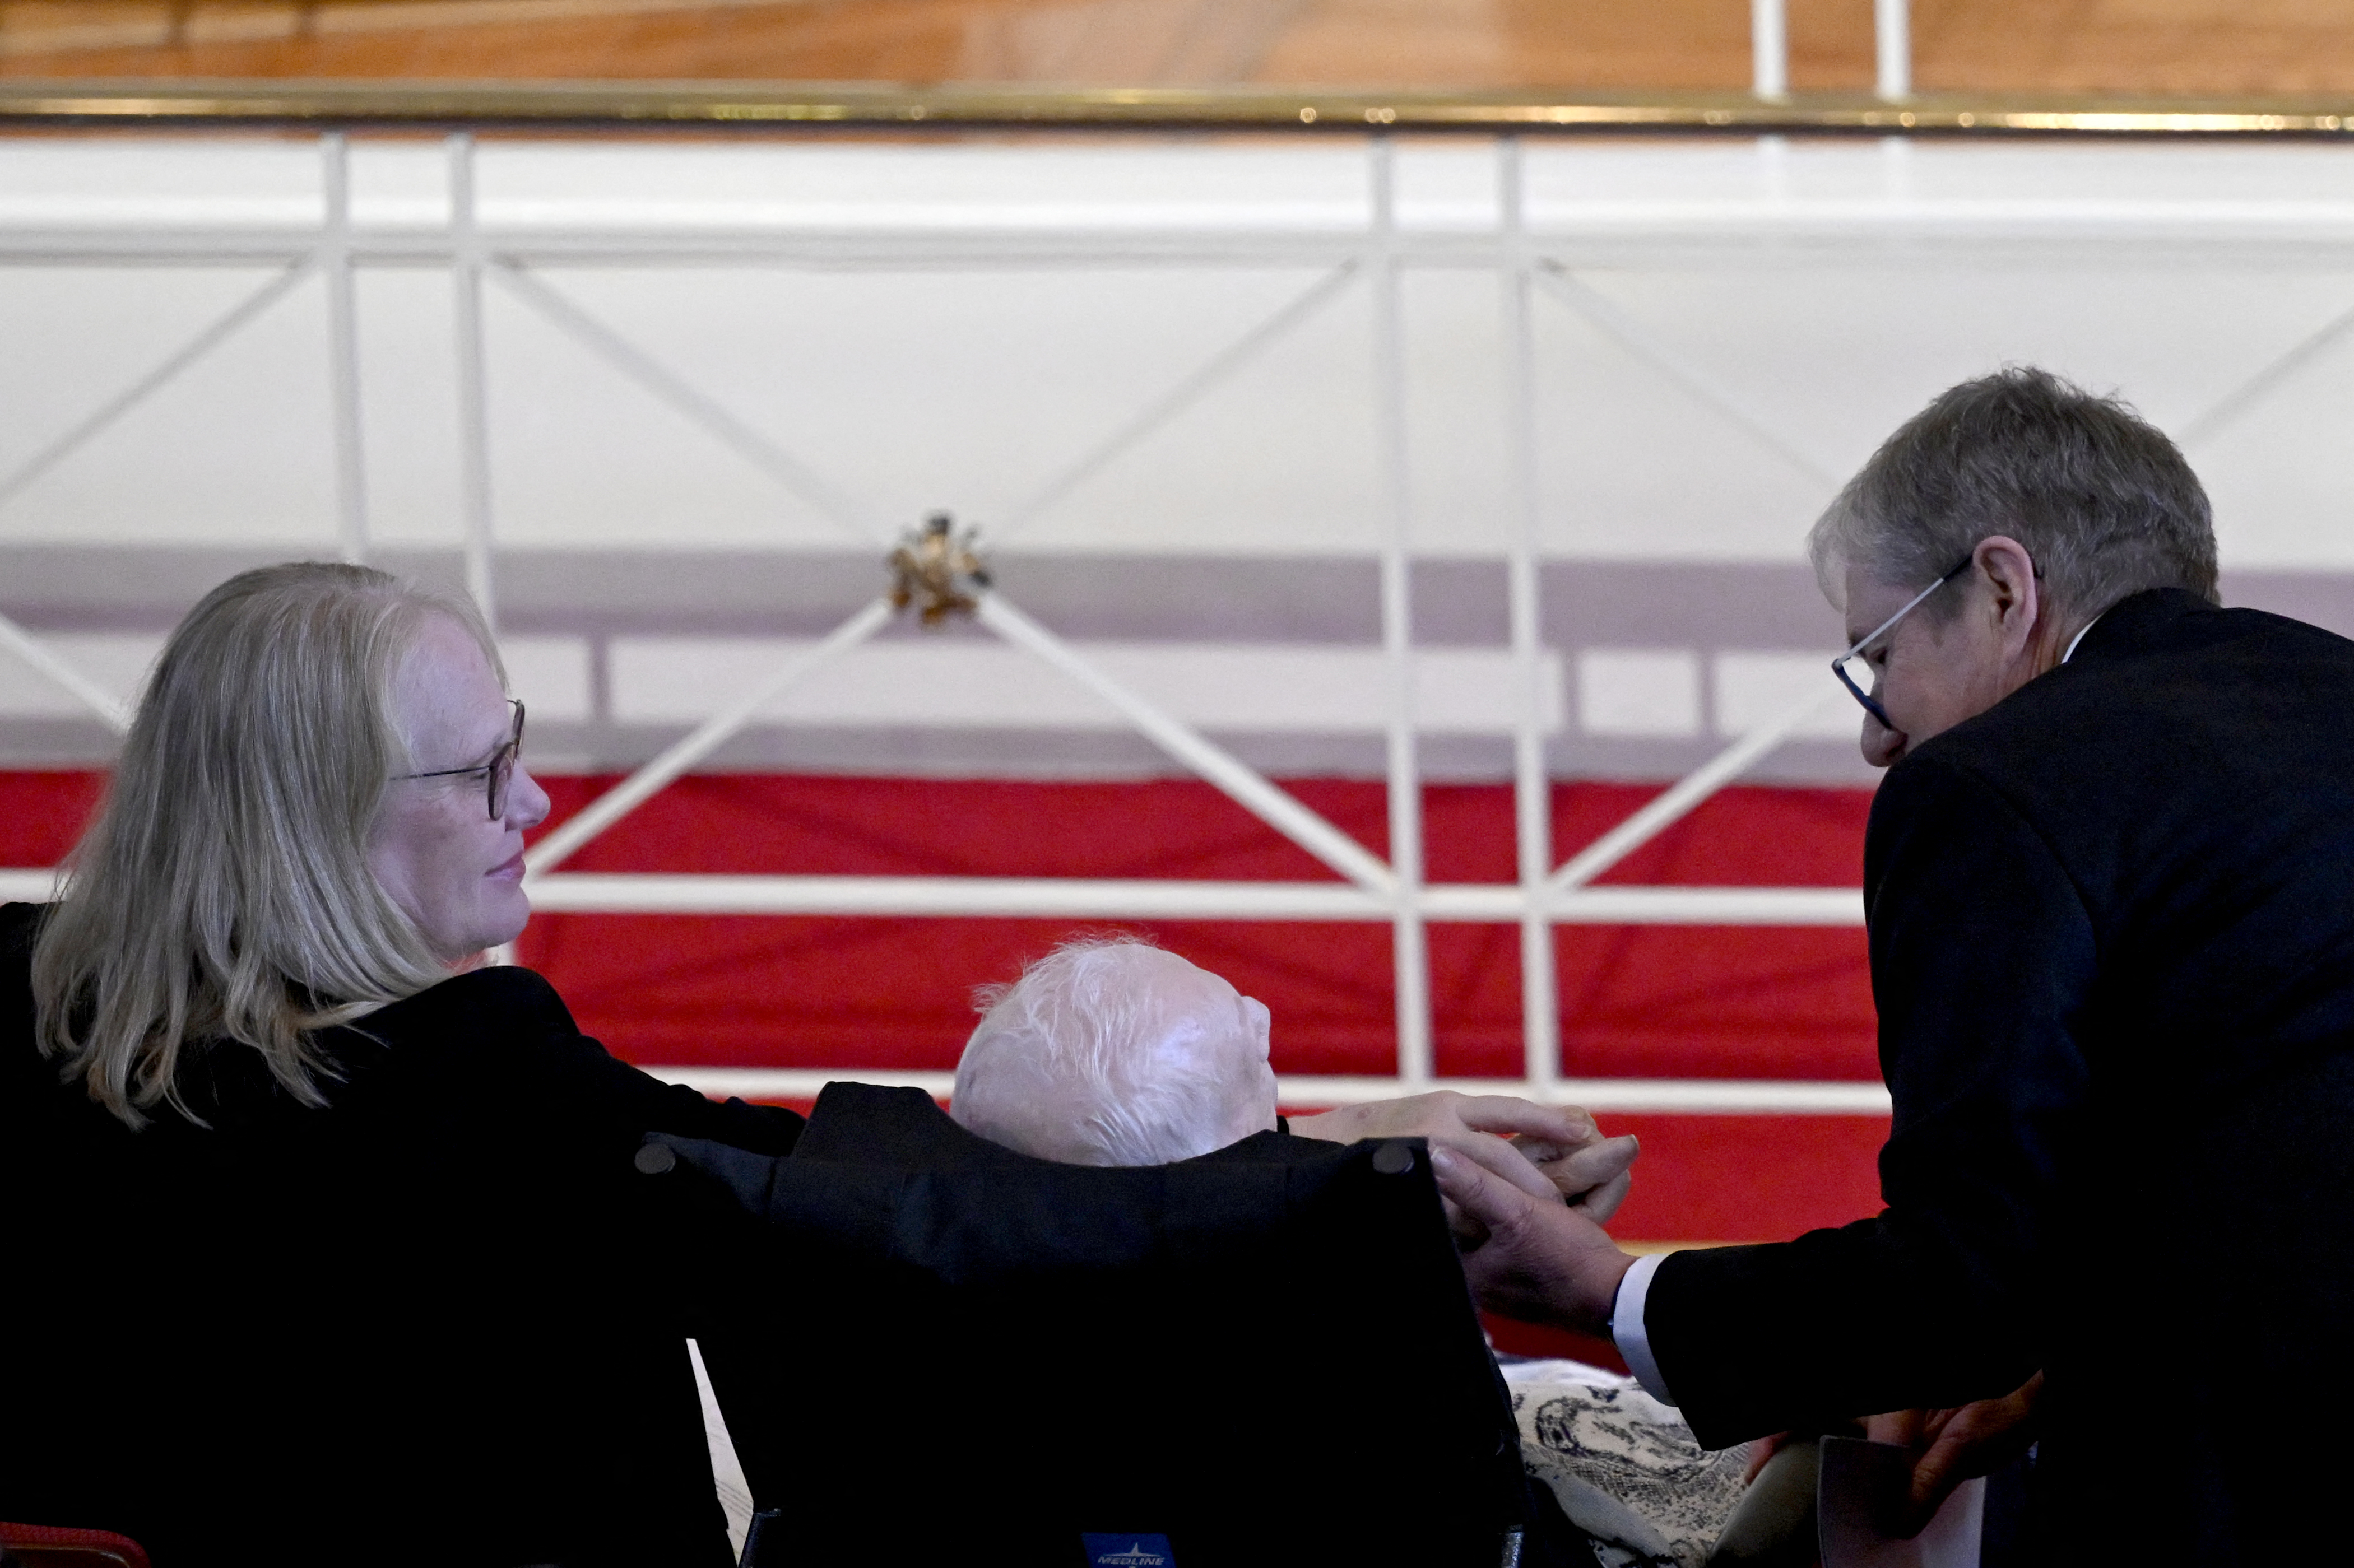 Amy Carter, former U.S. President Jimmy Carter, and James "Chip" Carter at former U.S. First Lady Rosalynn Carter's memorial service in Atlanta, Georgia on November 28, 2023 | Source: Getty Images